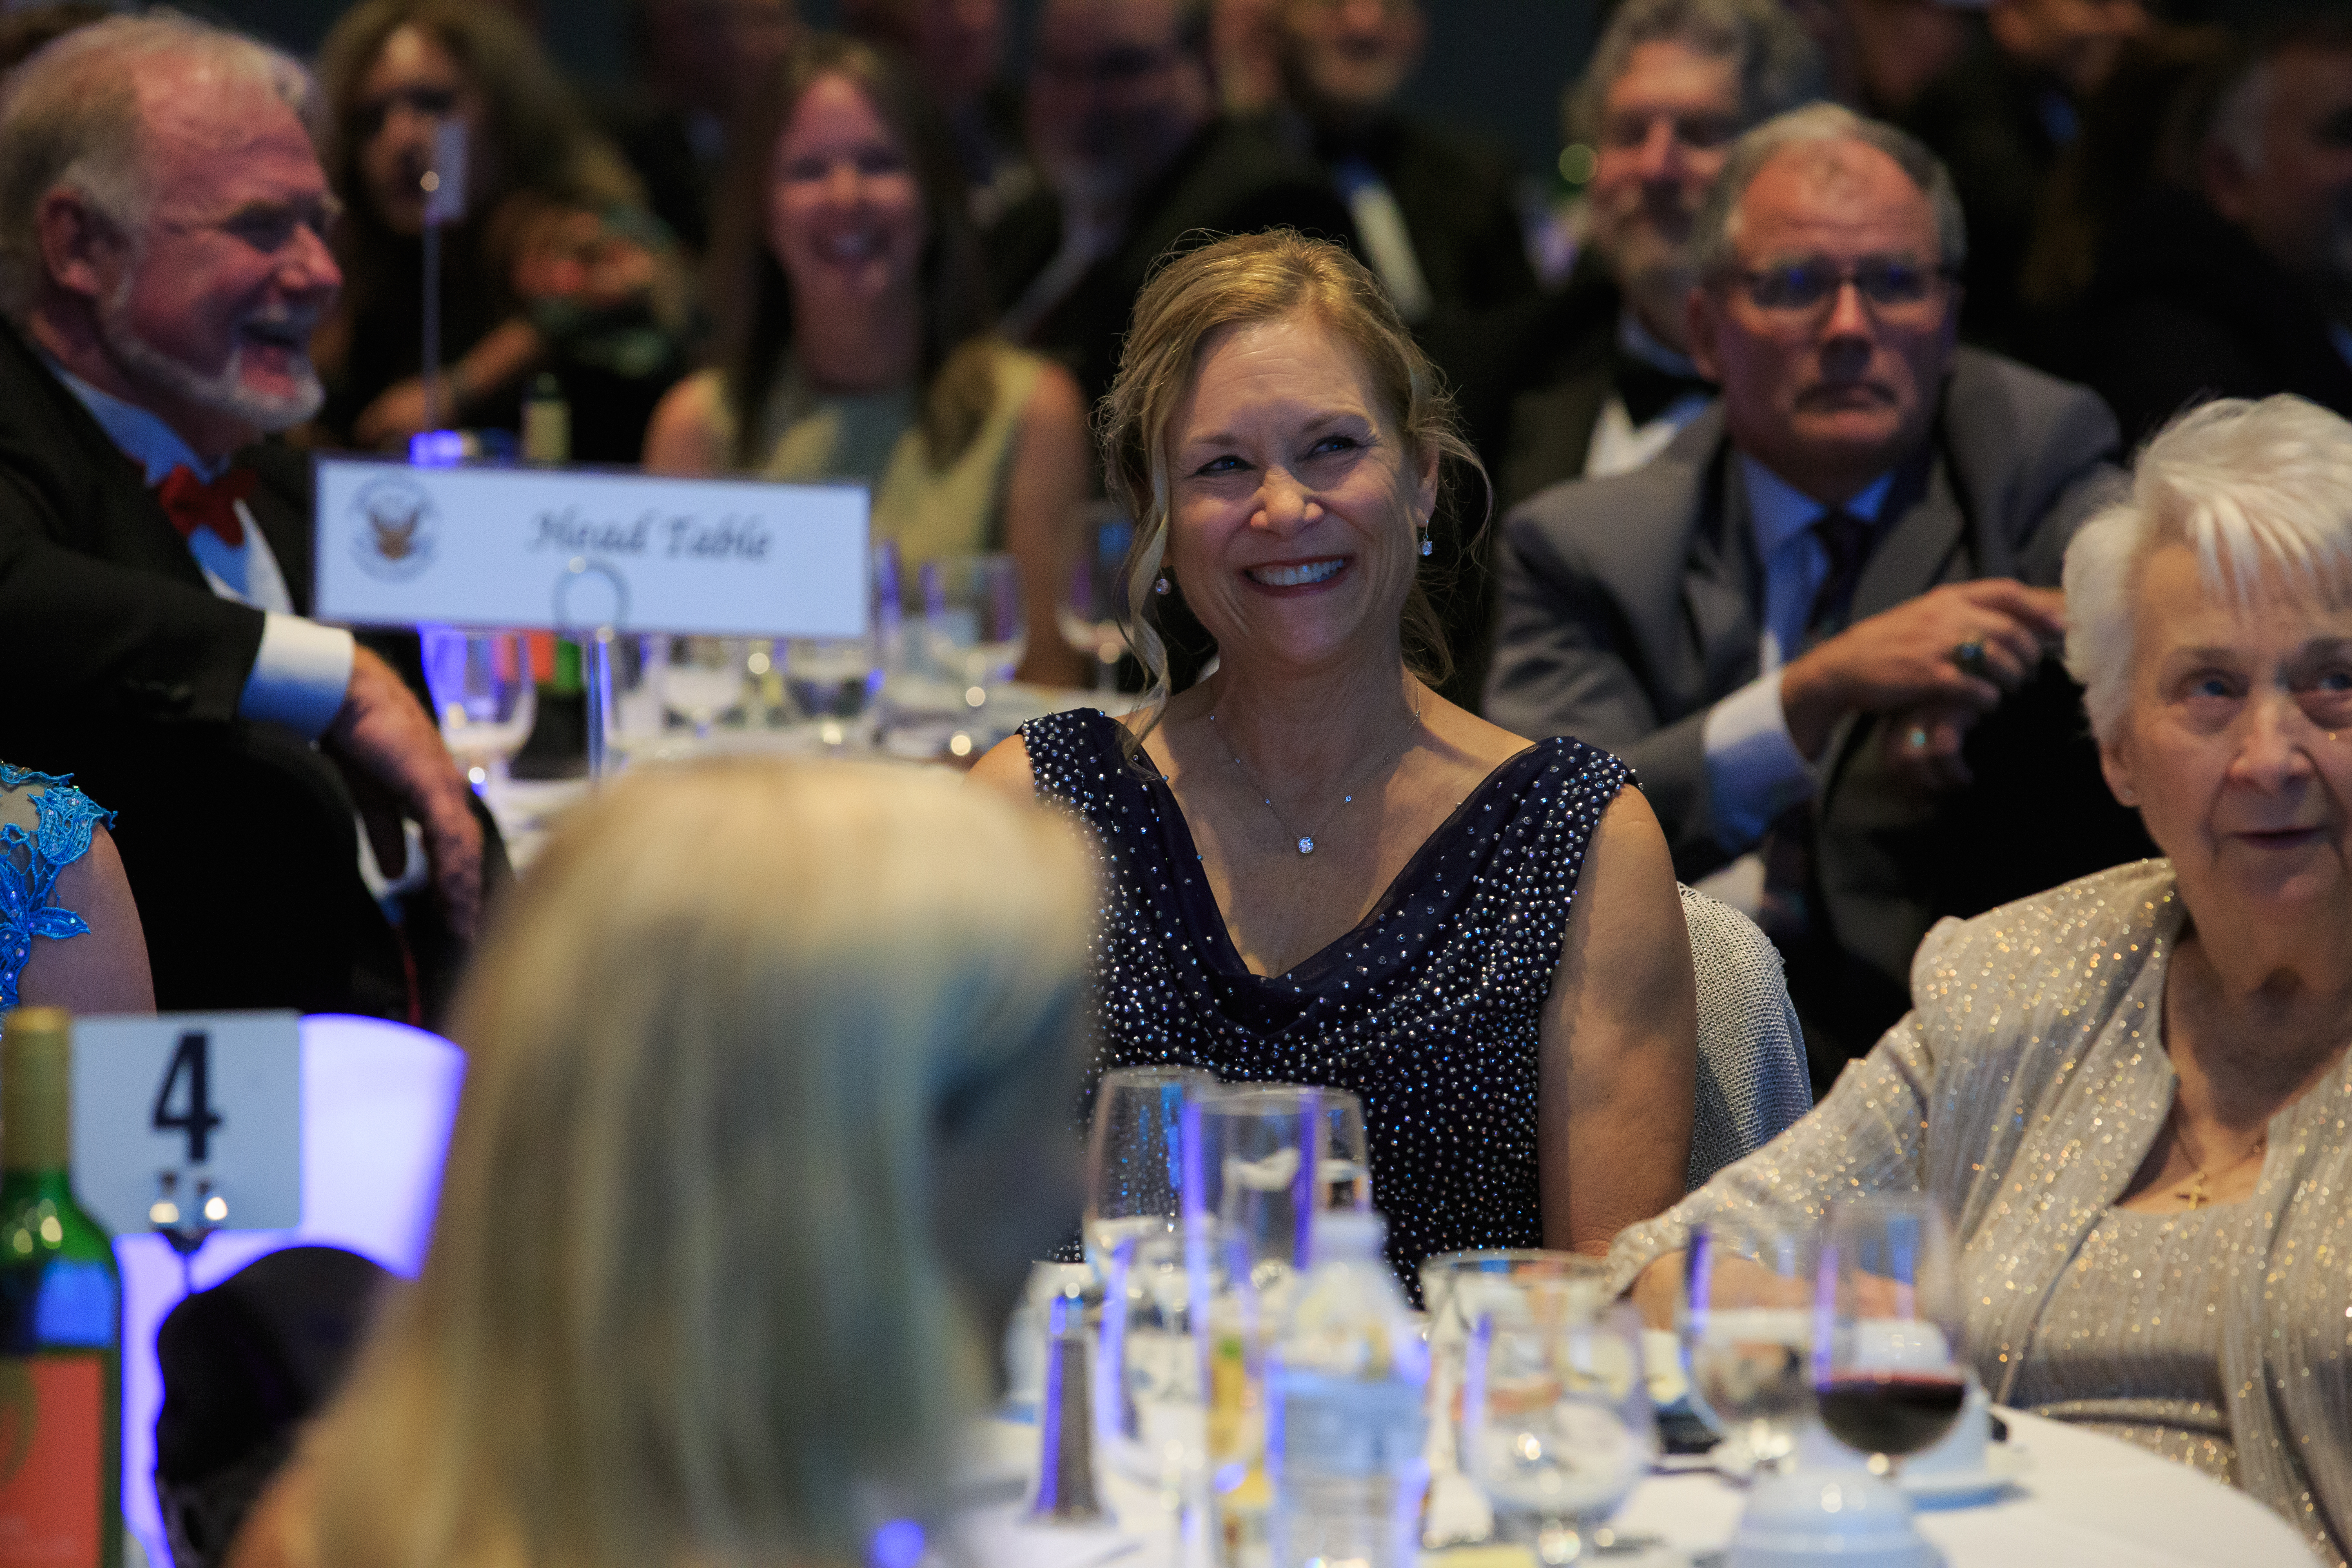 Kennedy Space Center Director Janet Petro sits in the audience at an awards ceremony held at the Florida spaceport's visitor complex on June 24, 2022, where she was honored with the Dr. Kurt H. Debus Award.